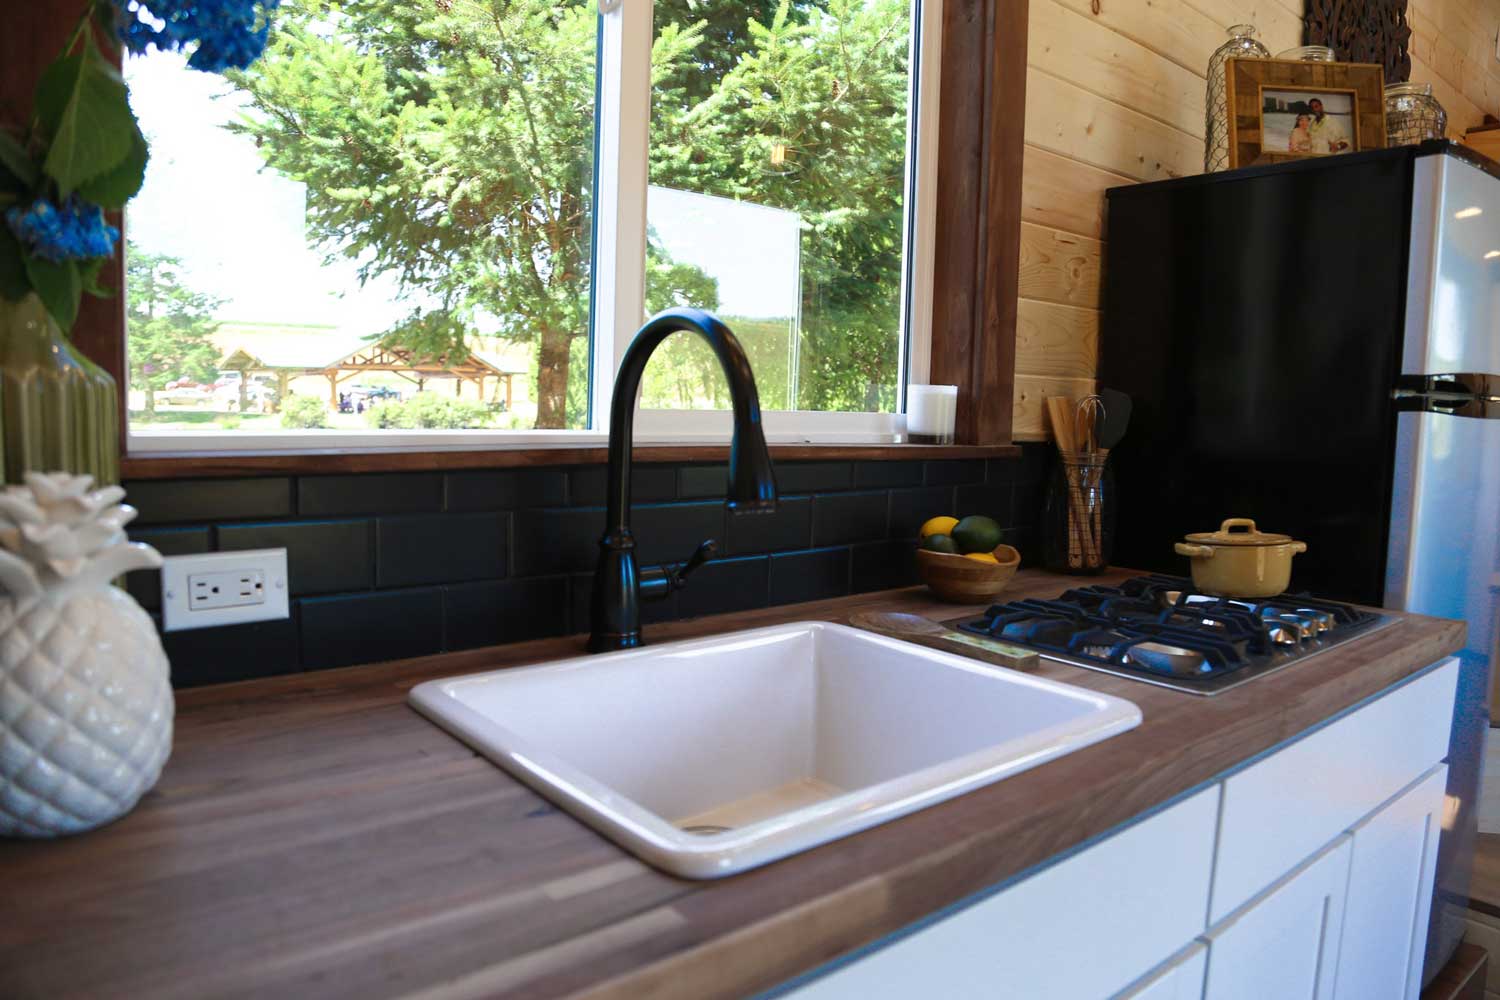 Kitchen sink of the Tropical Getaway custom tiny house